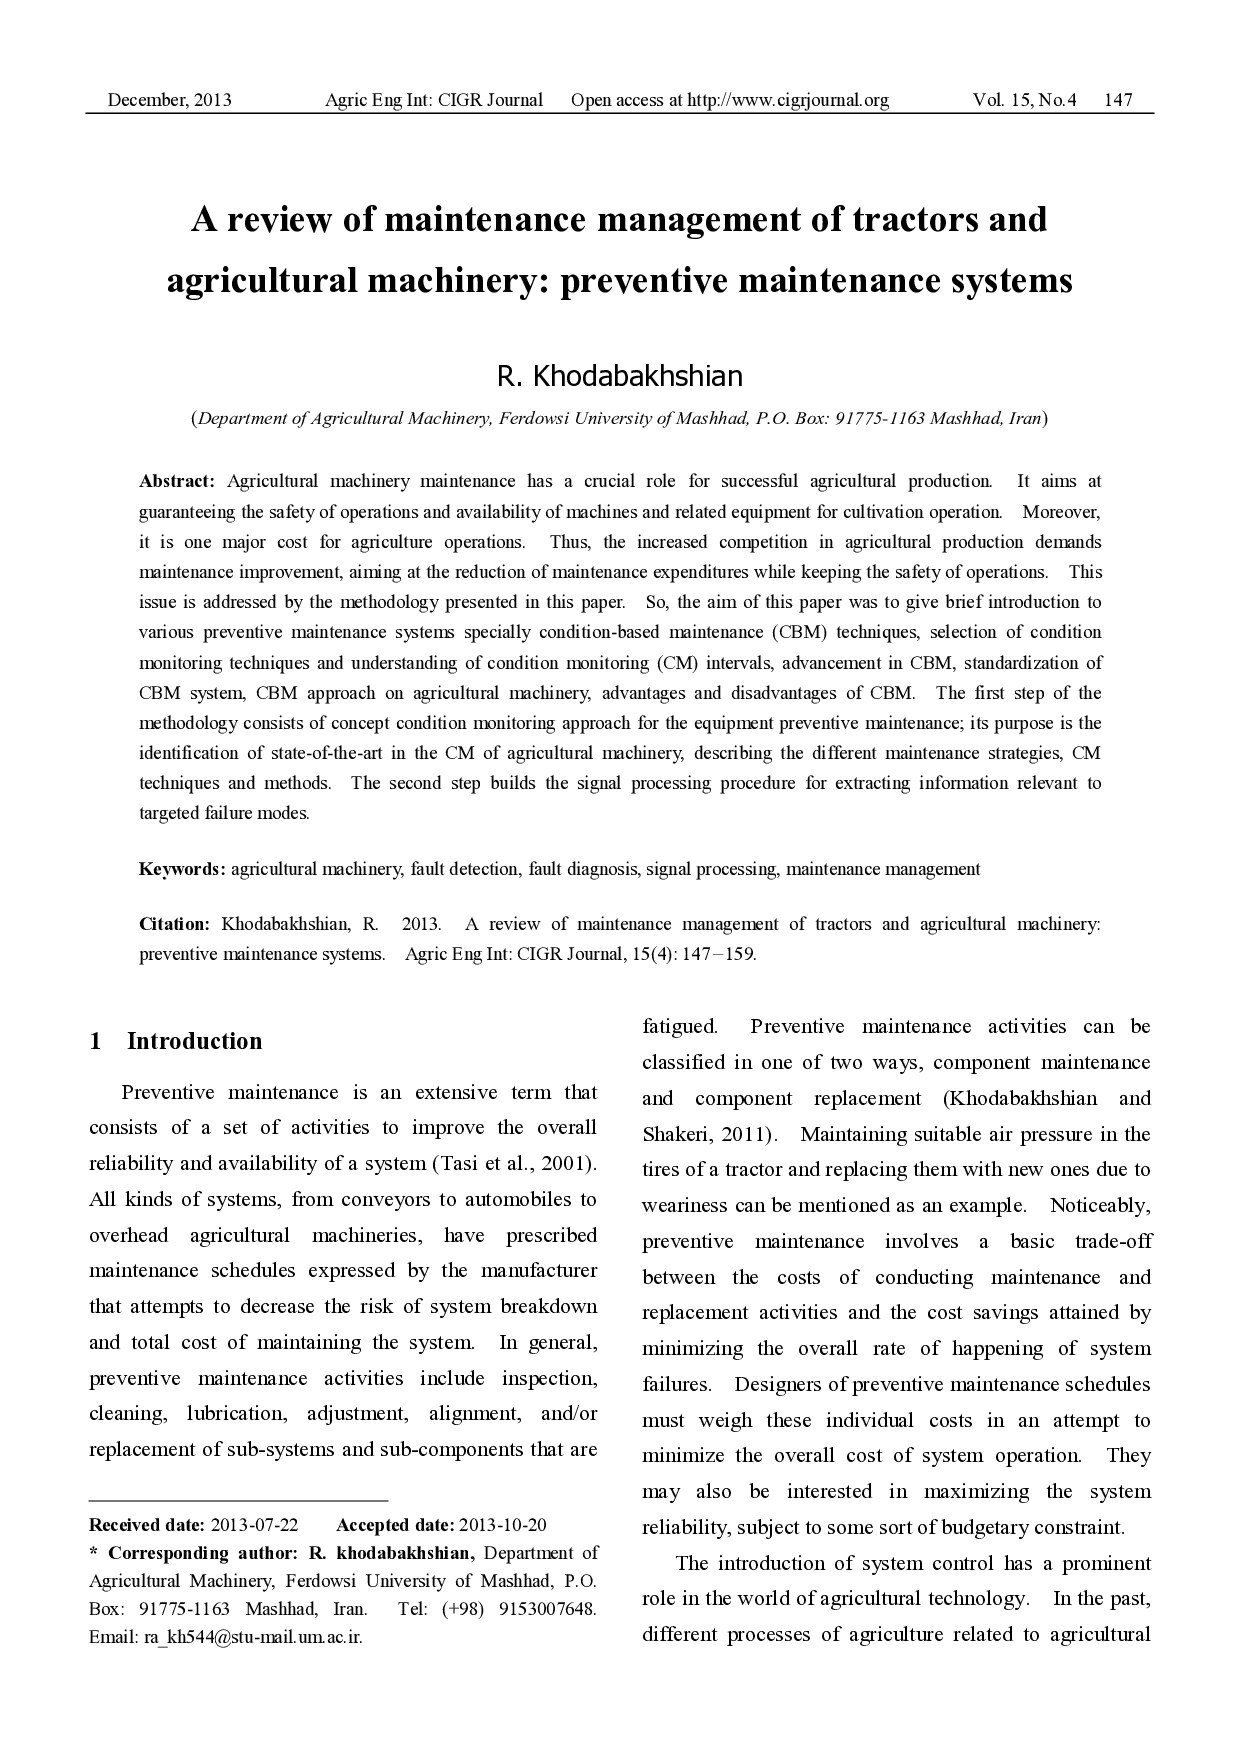 A REVIEW OF MAINTENANCE MANAGEMENT OF TRACTORS AND AGRICULTURAL MACHINERY PREVENTIVE MAINTENANCE SYSTEMS BY R. KHODABAKHSHIAN